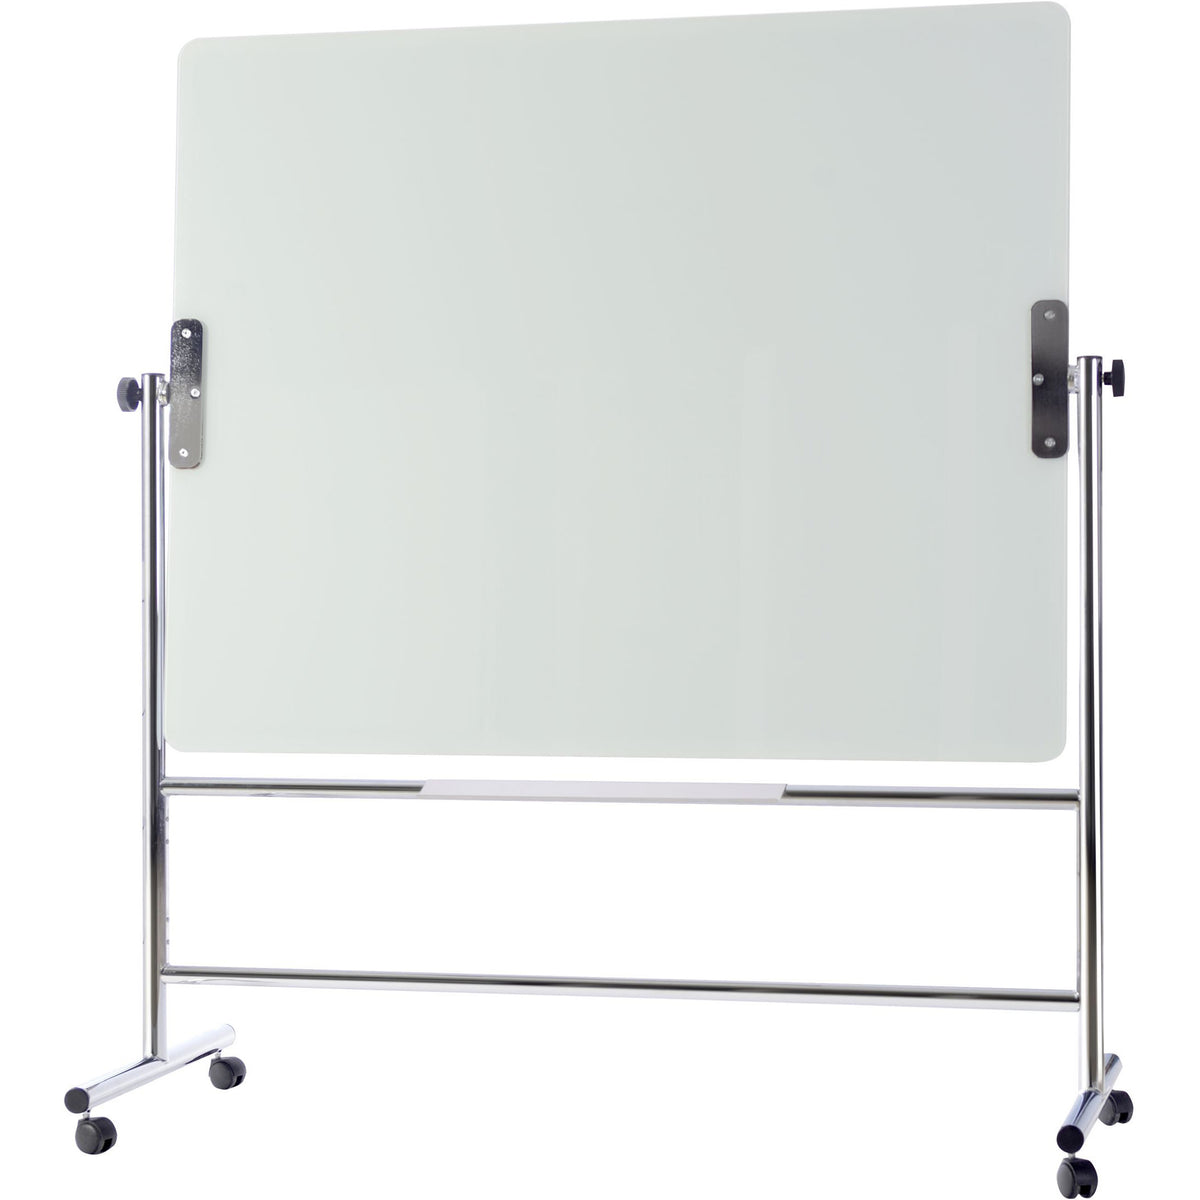 GQR0350GR Reversible Double Sided Magnetic Dry Erase White Board Easel, Mobile Rolling Whiteboard on Wheels, 36" x 48" by MasterVision